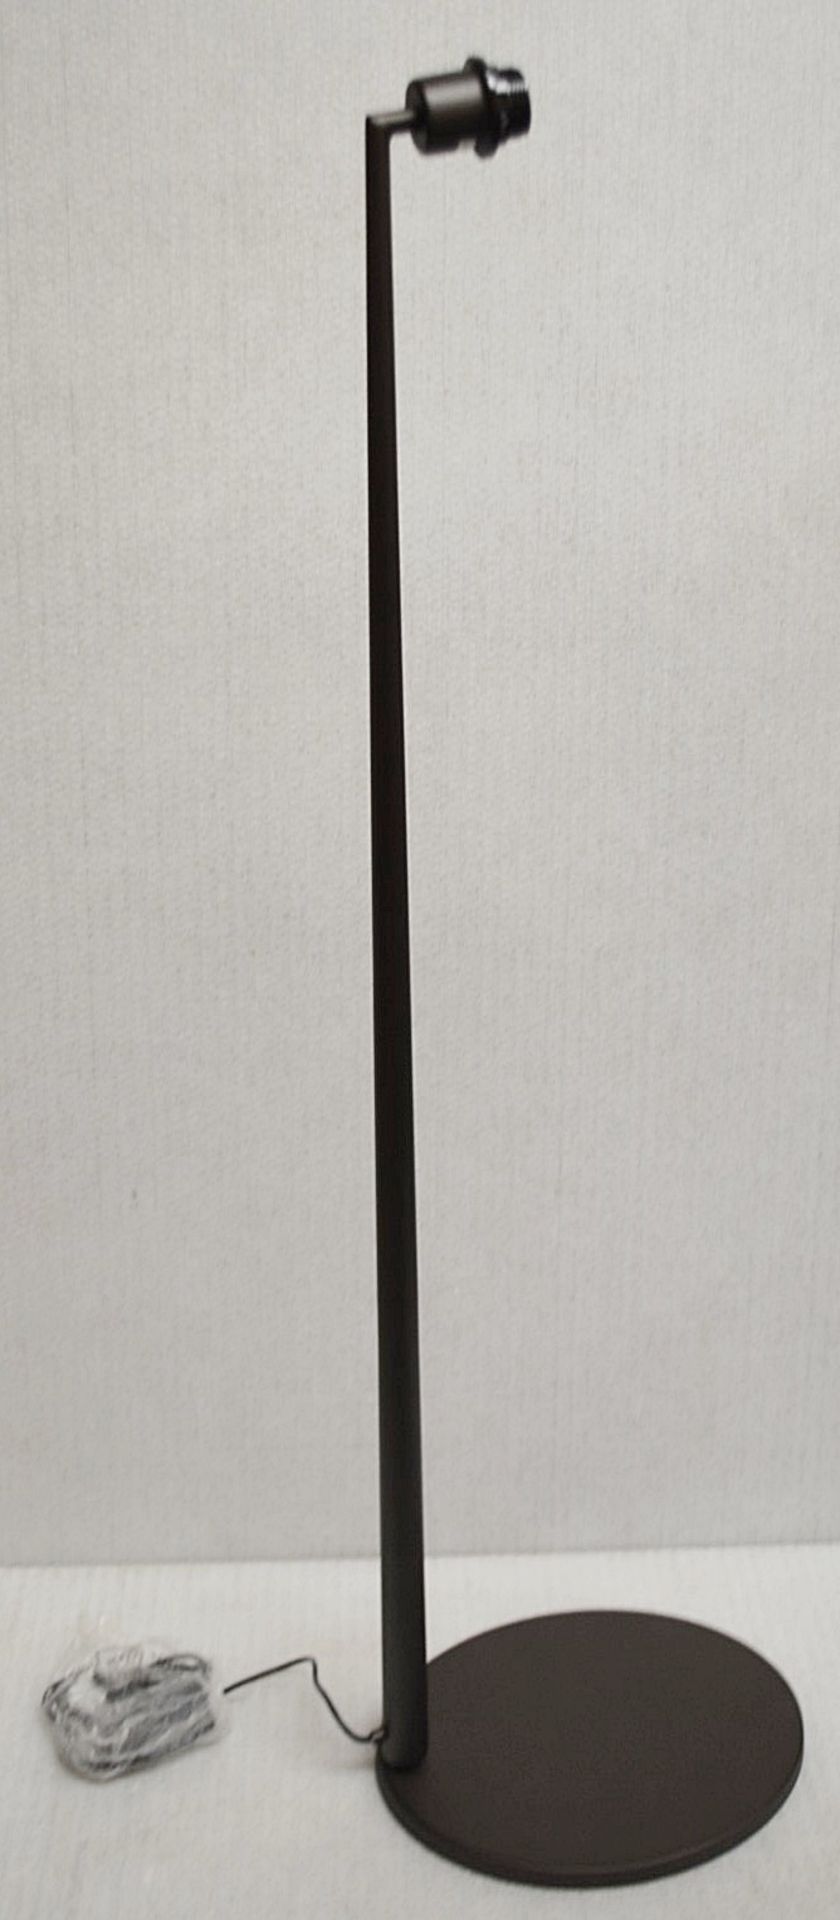 1 x CHELSOM Freestanding Floor Lamp In A Black Bronze Finish With Stylish Oval Base - Unused Boxed